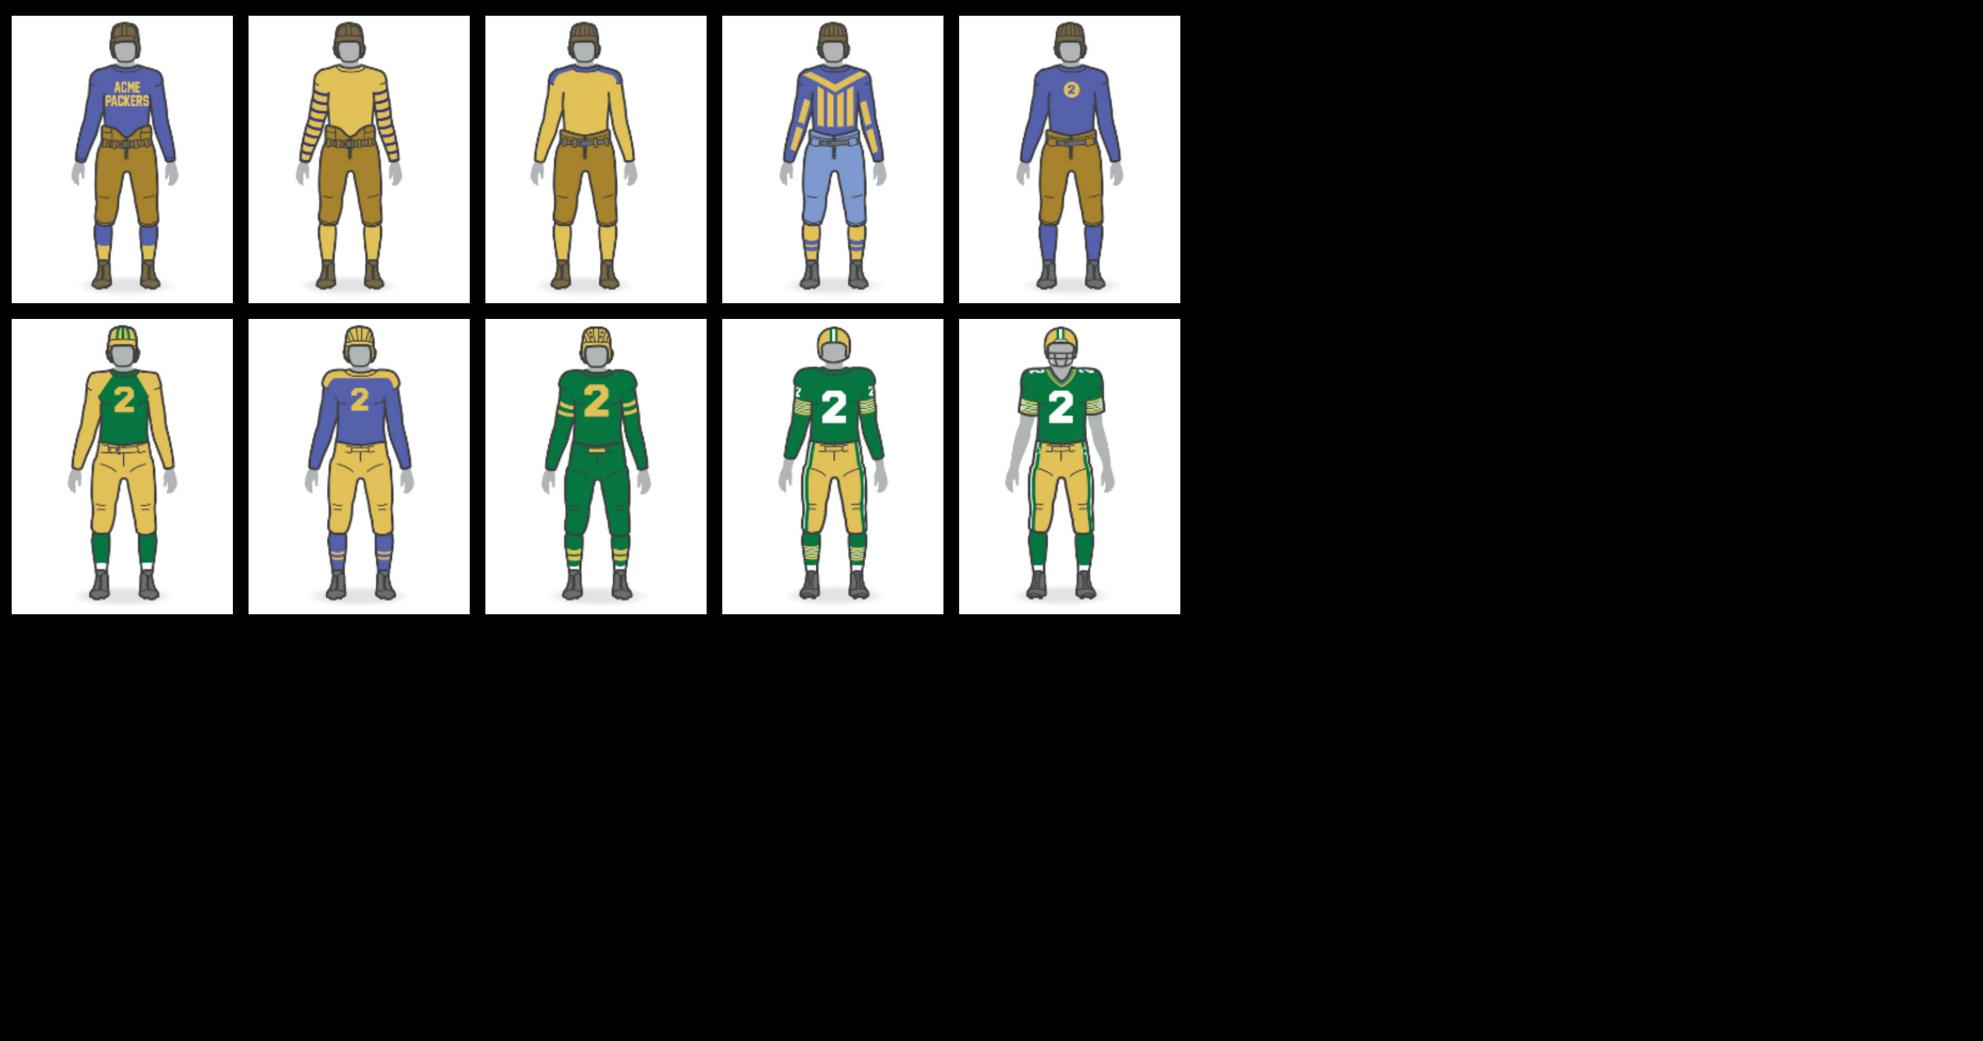 Packers at 100  Explore evolution of Green Bay Packers uniforms